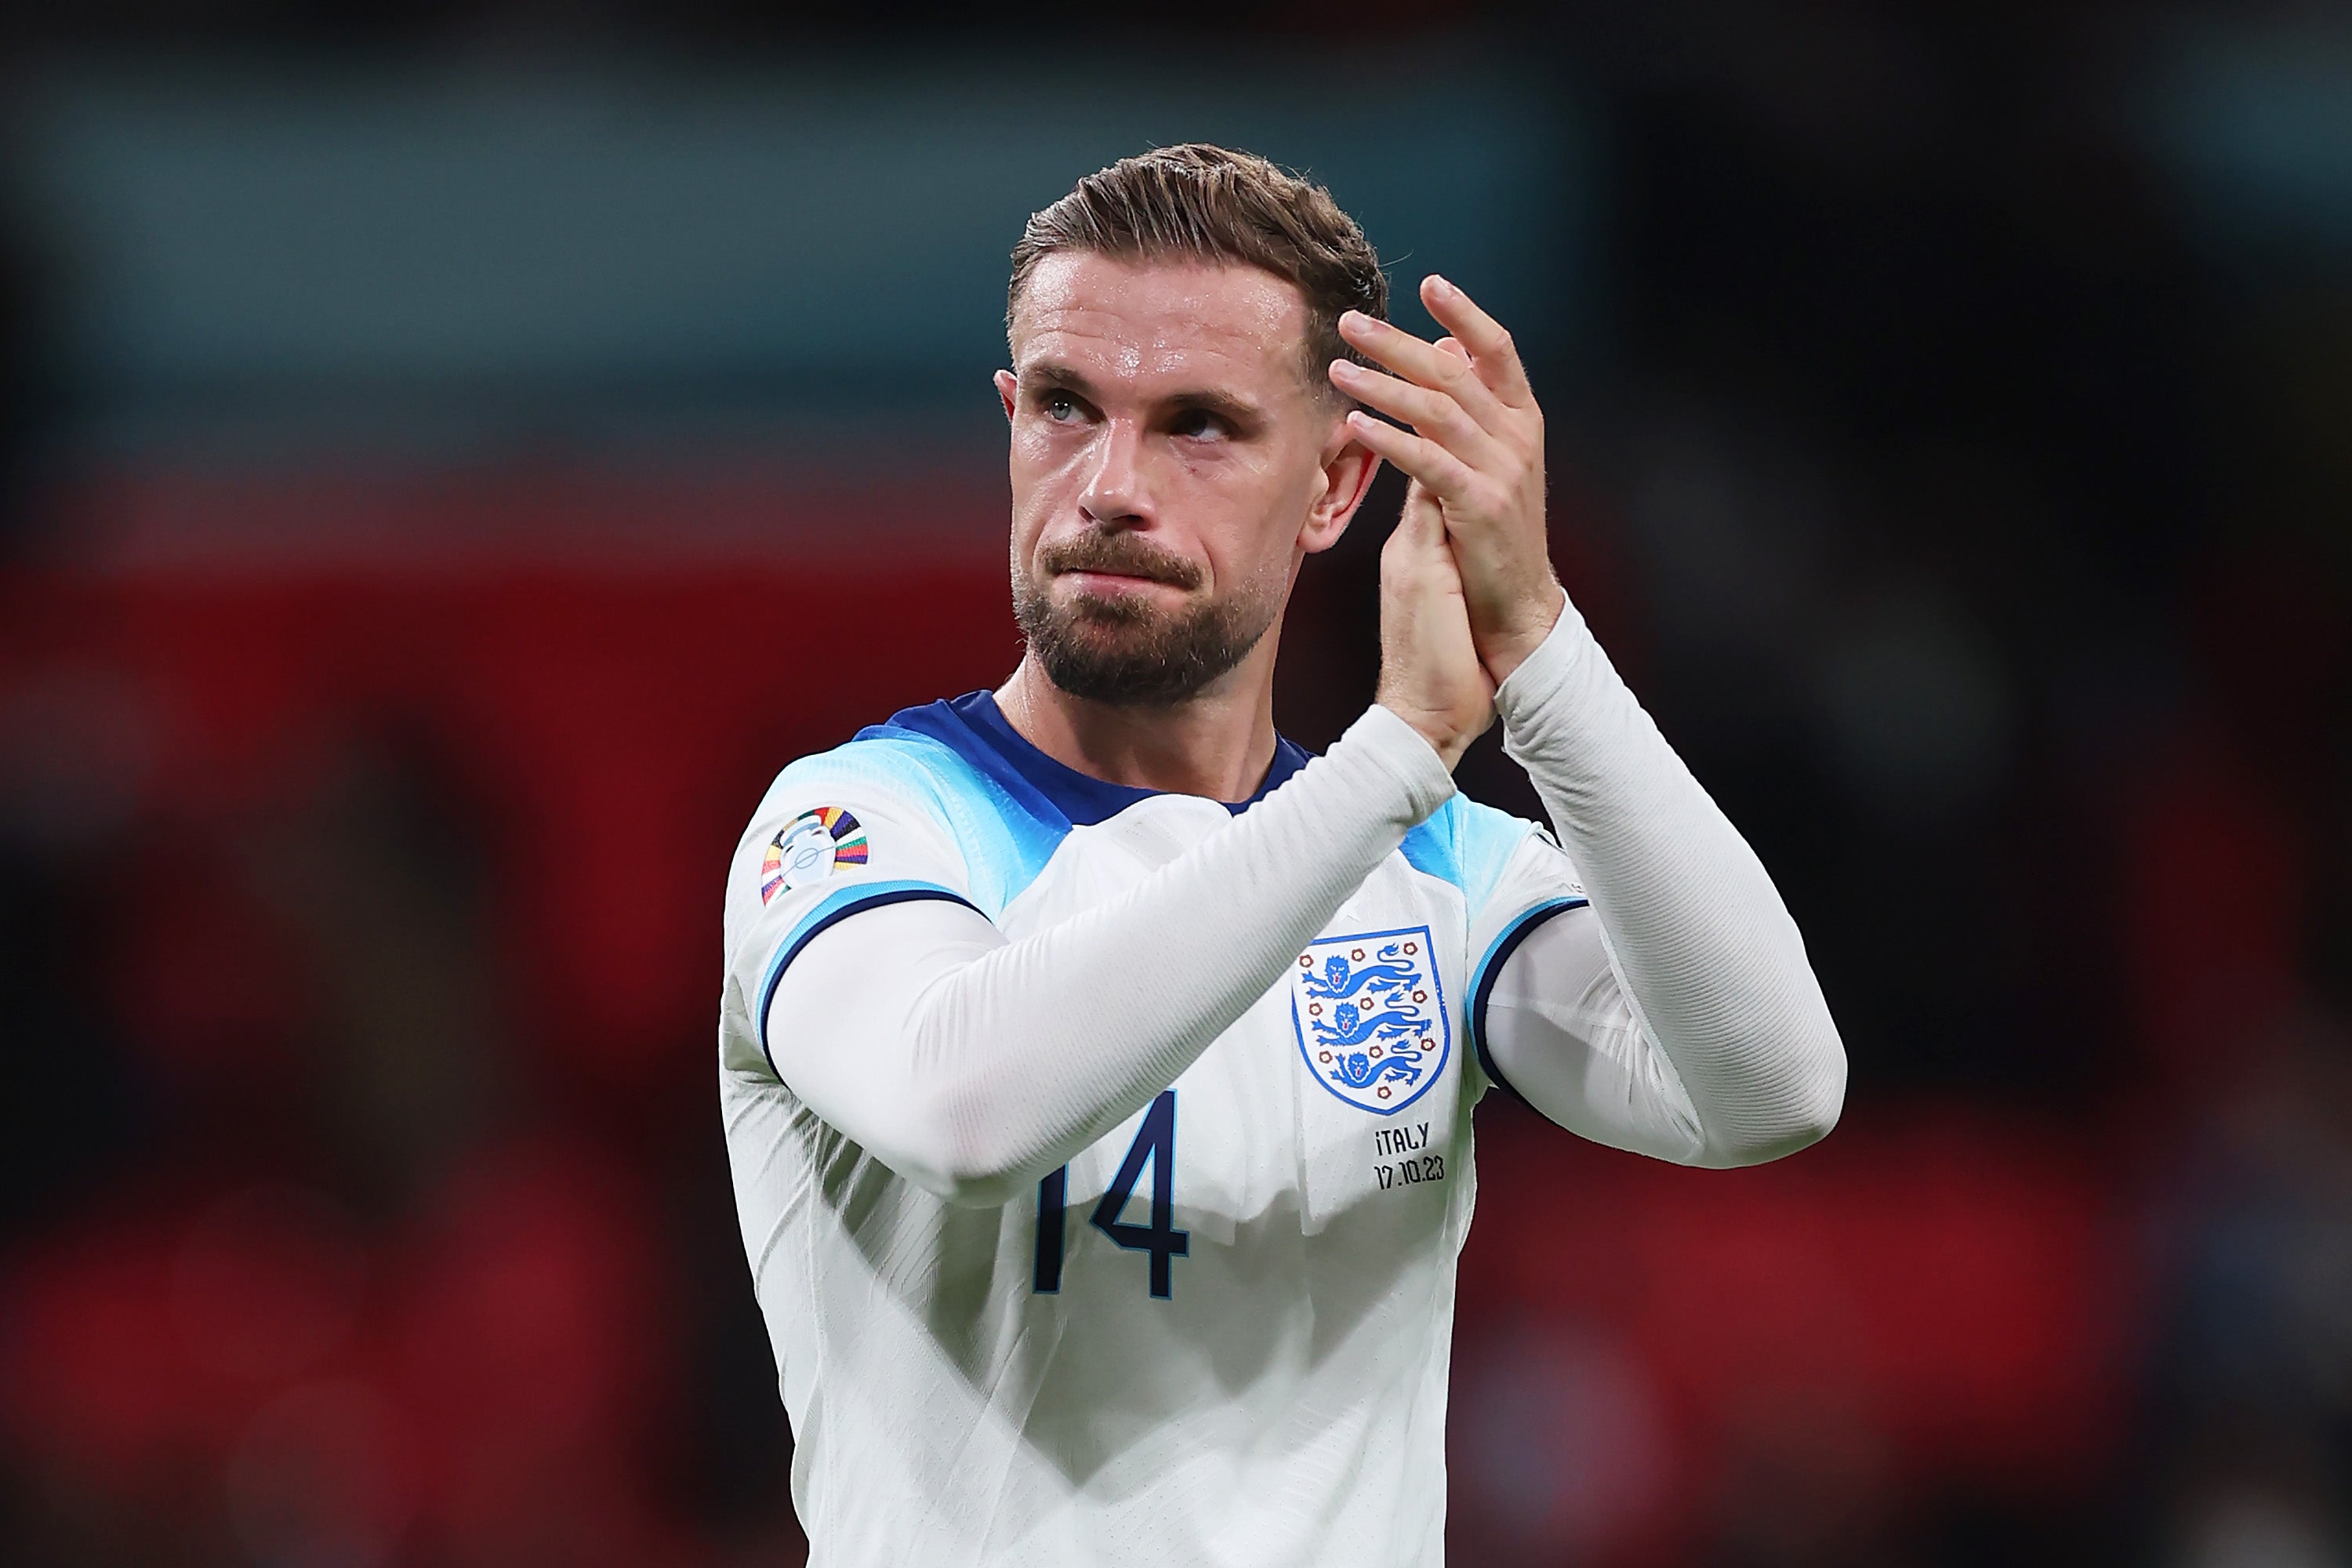 Henderson’s place in the England team is at risk ahead of the European Championships in June